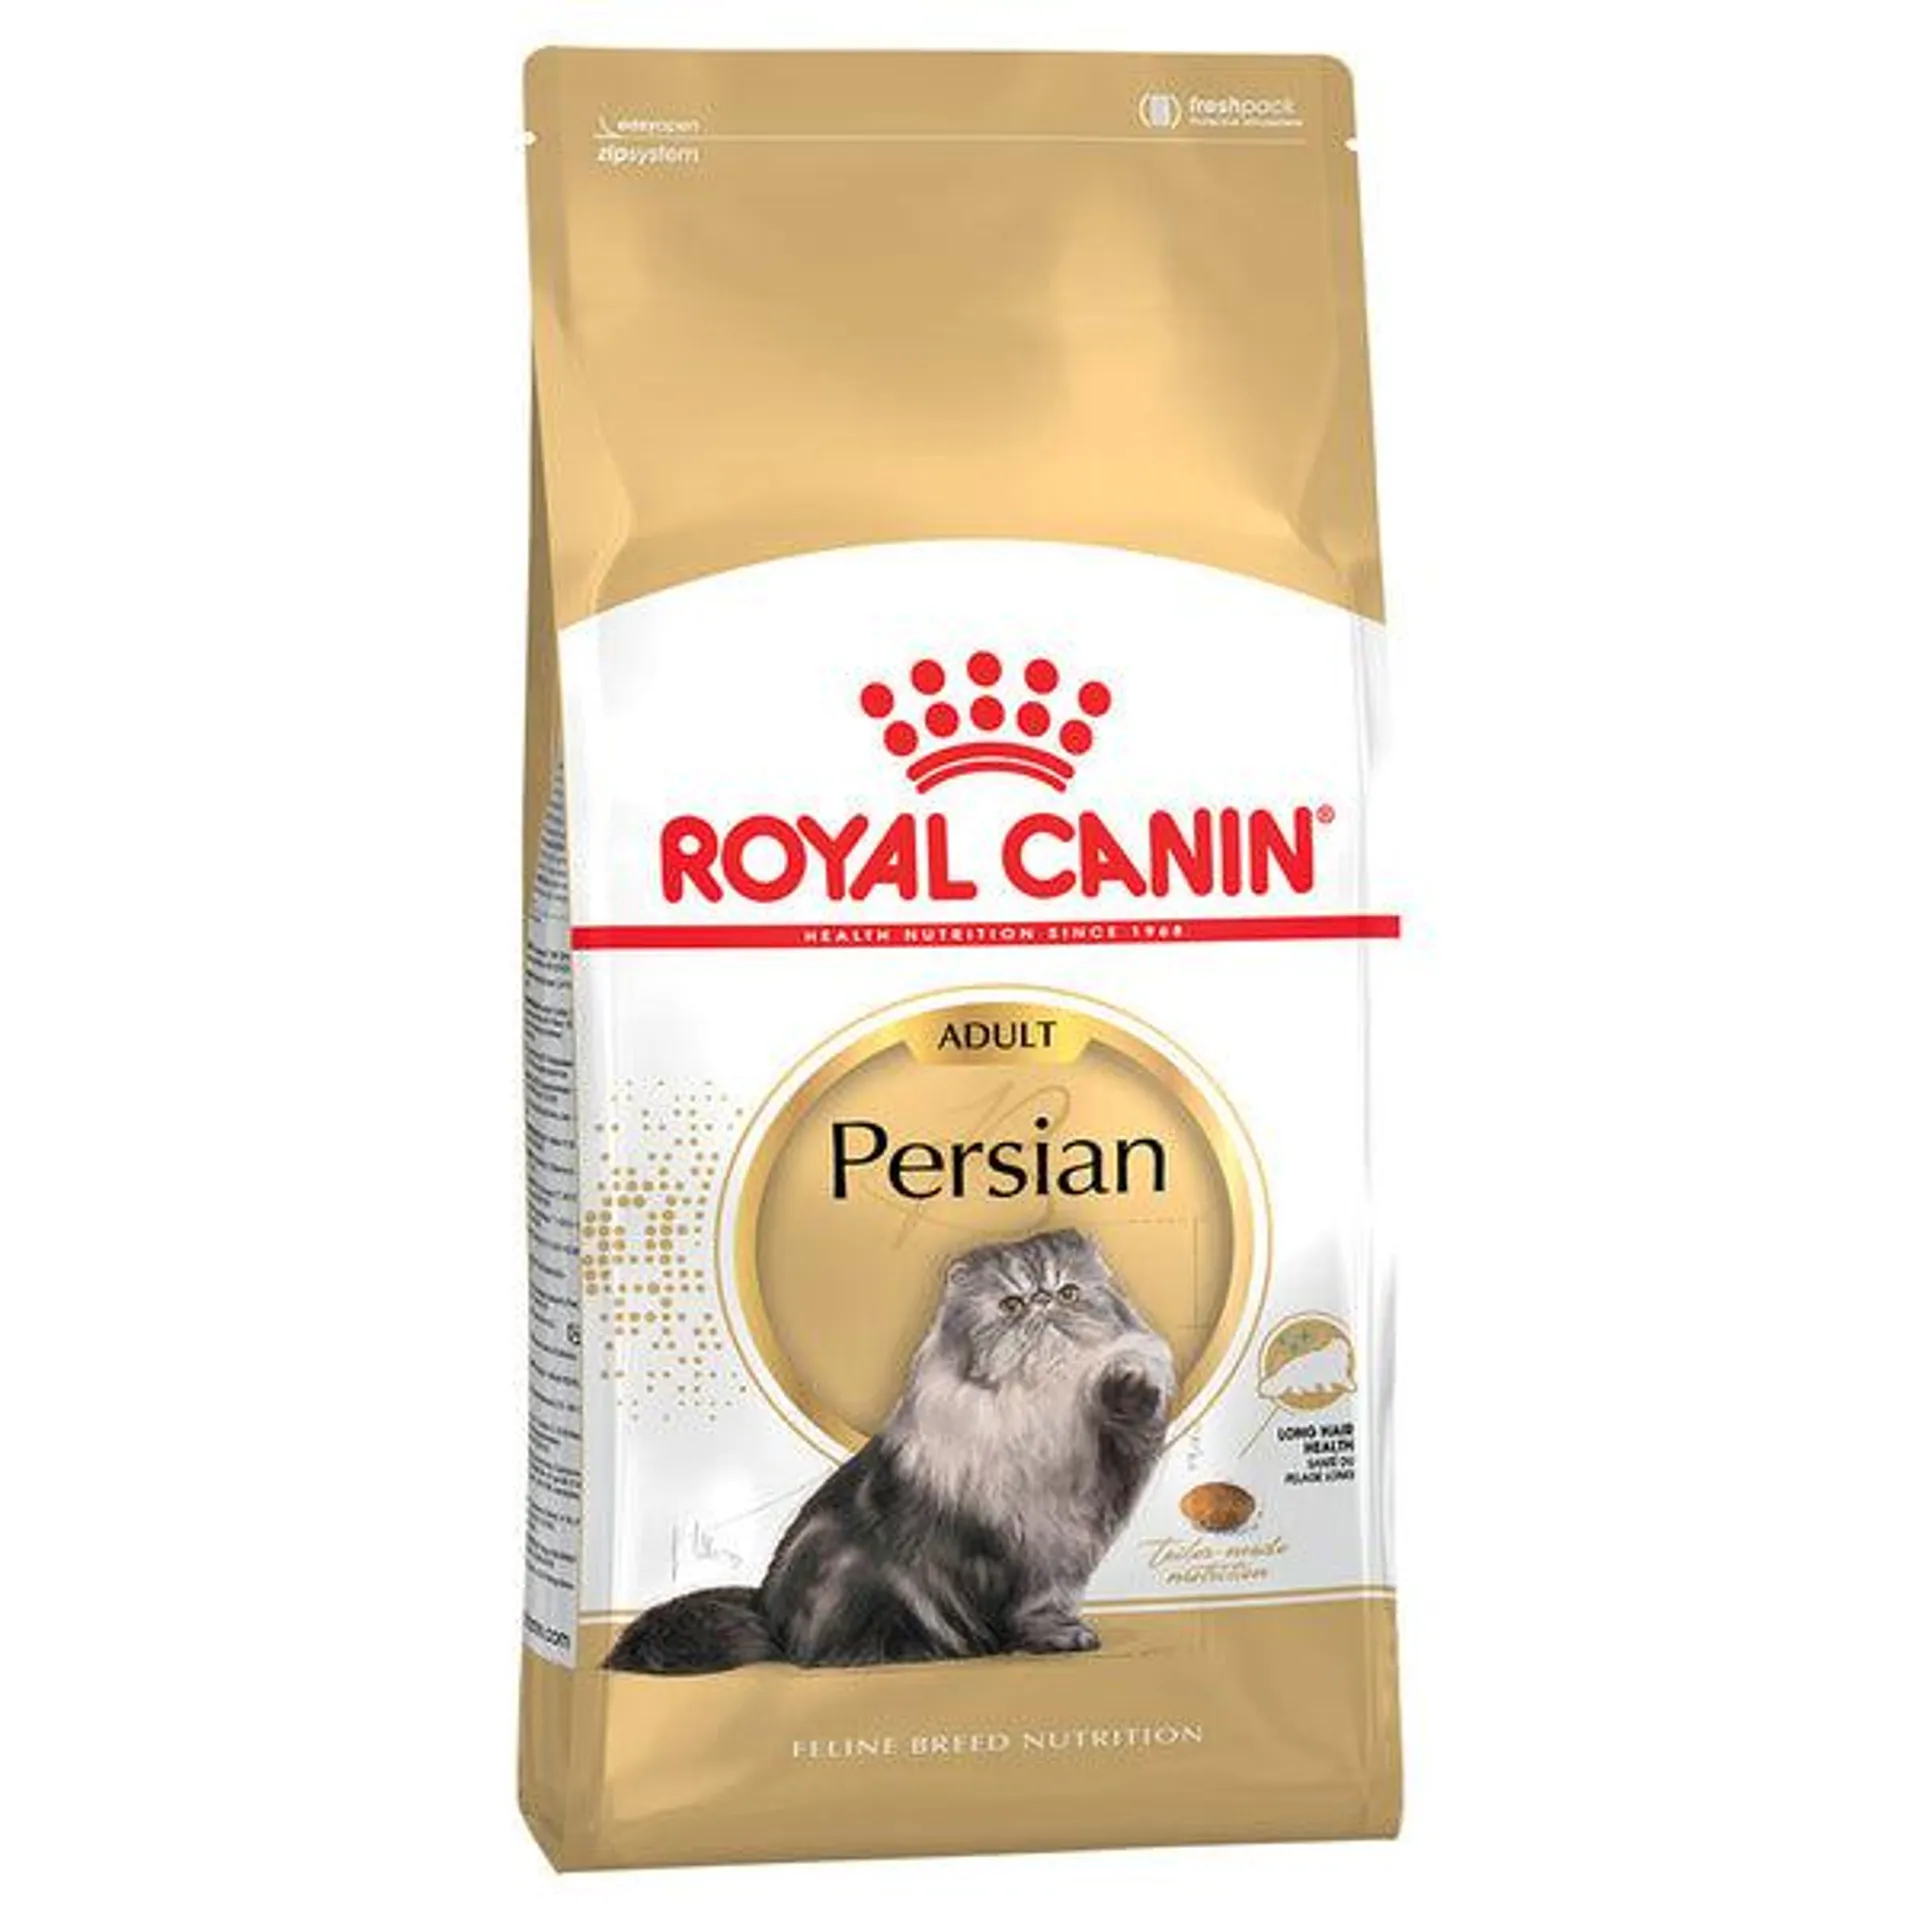 Royal Canin - Persian Breed Adult Cat Dry Food (10kg)